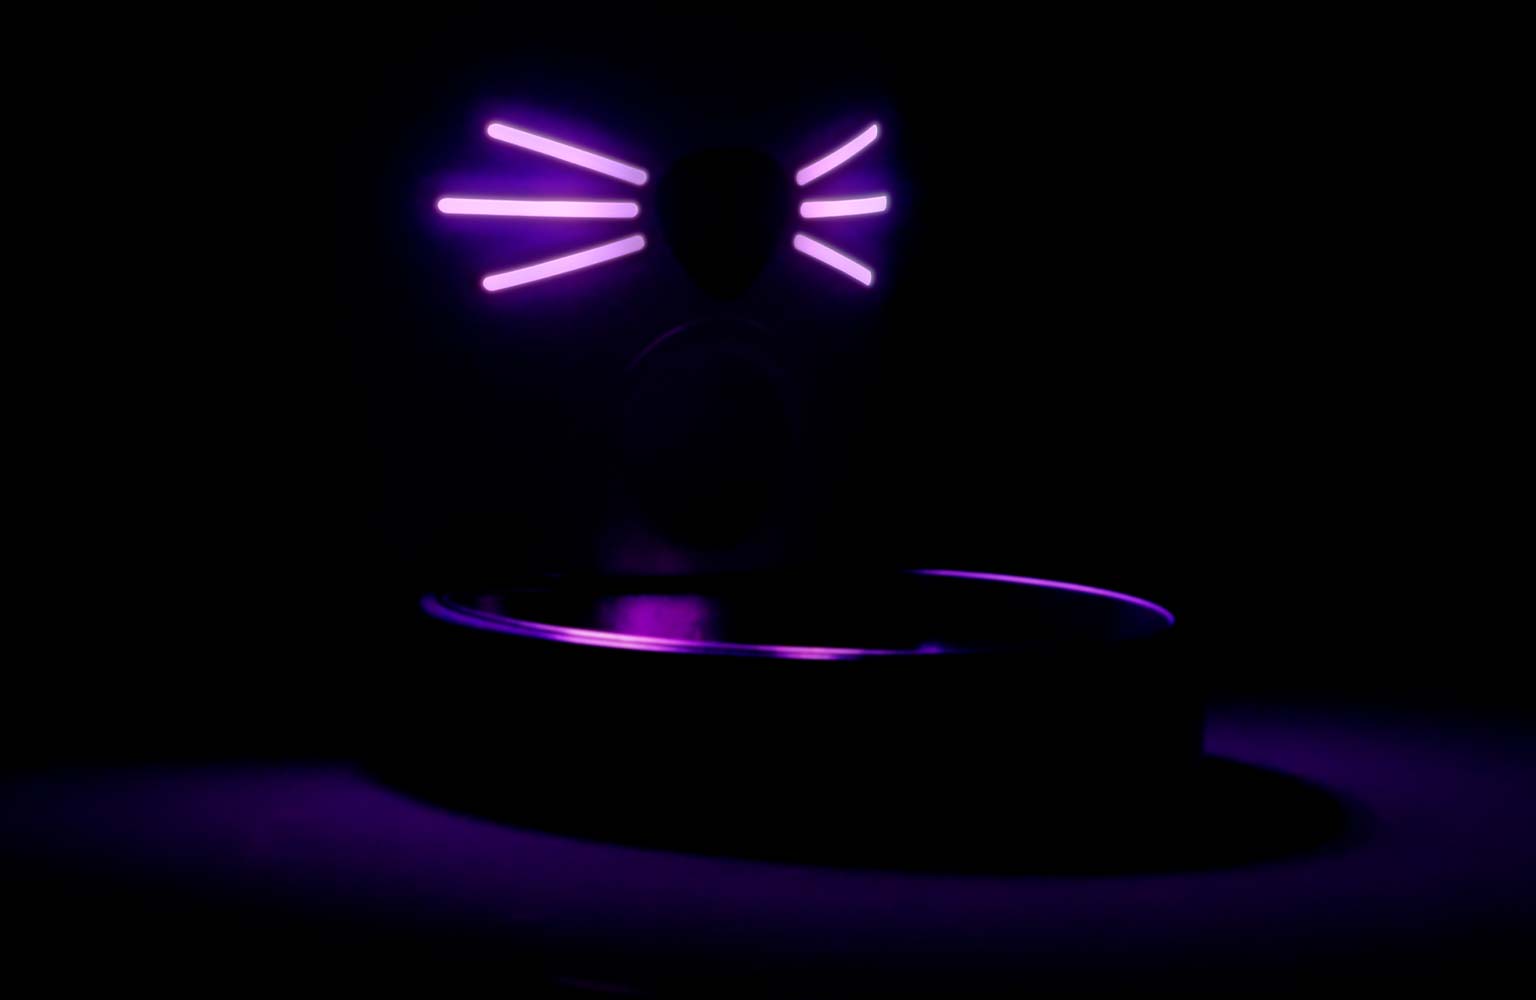 The Catit PIXI Vision Smart Feeder acts as a nightlight for your cat